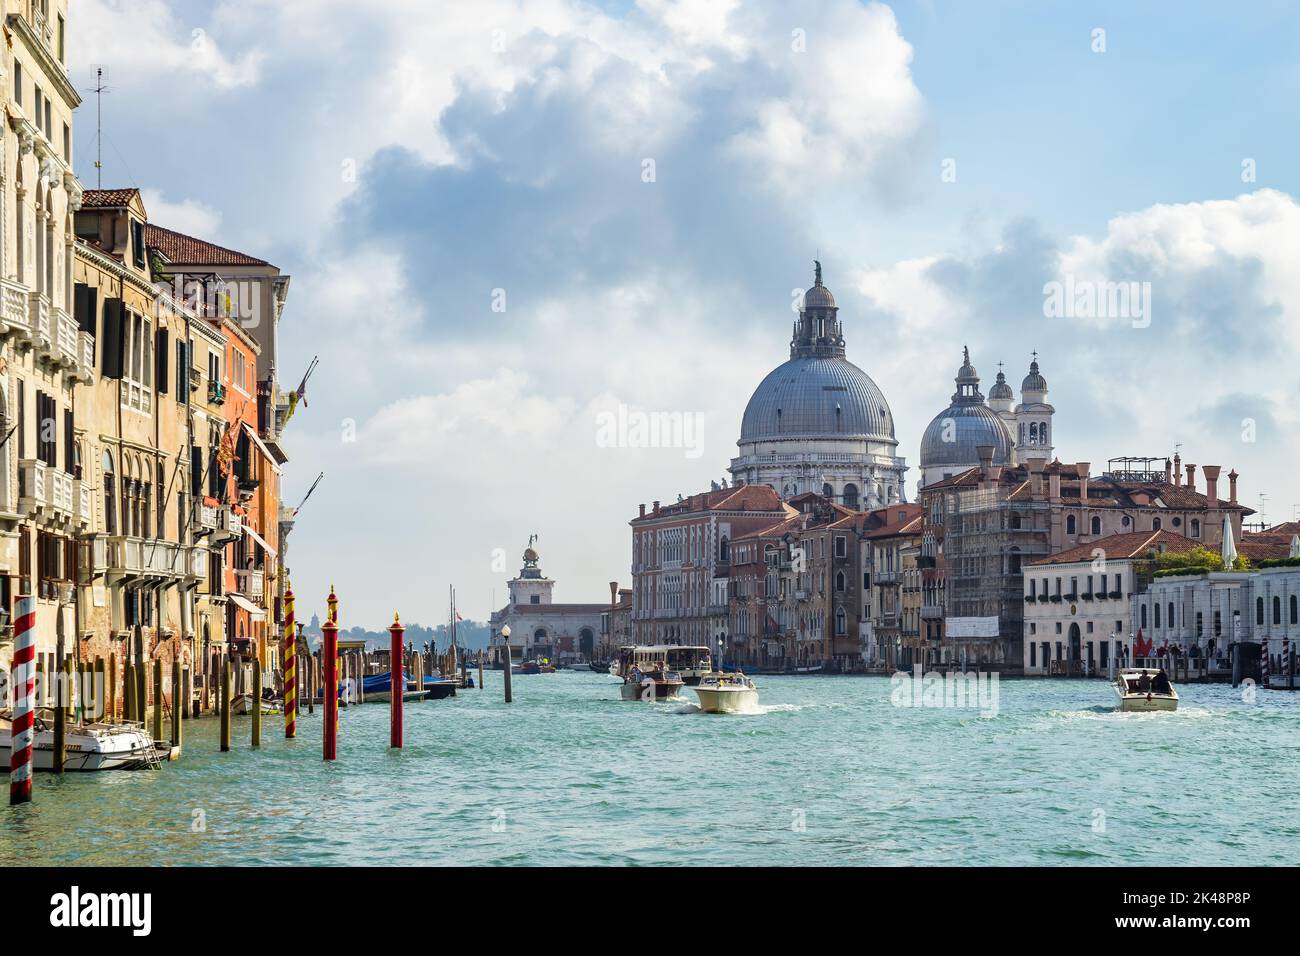 VENICE, ITALY - OCTOBER 12 : View down the Grand Canal in Venice on October 12, 2014. Unidentified people Stock Photo